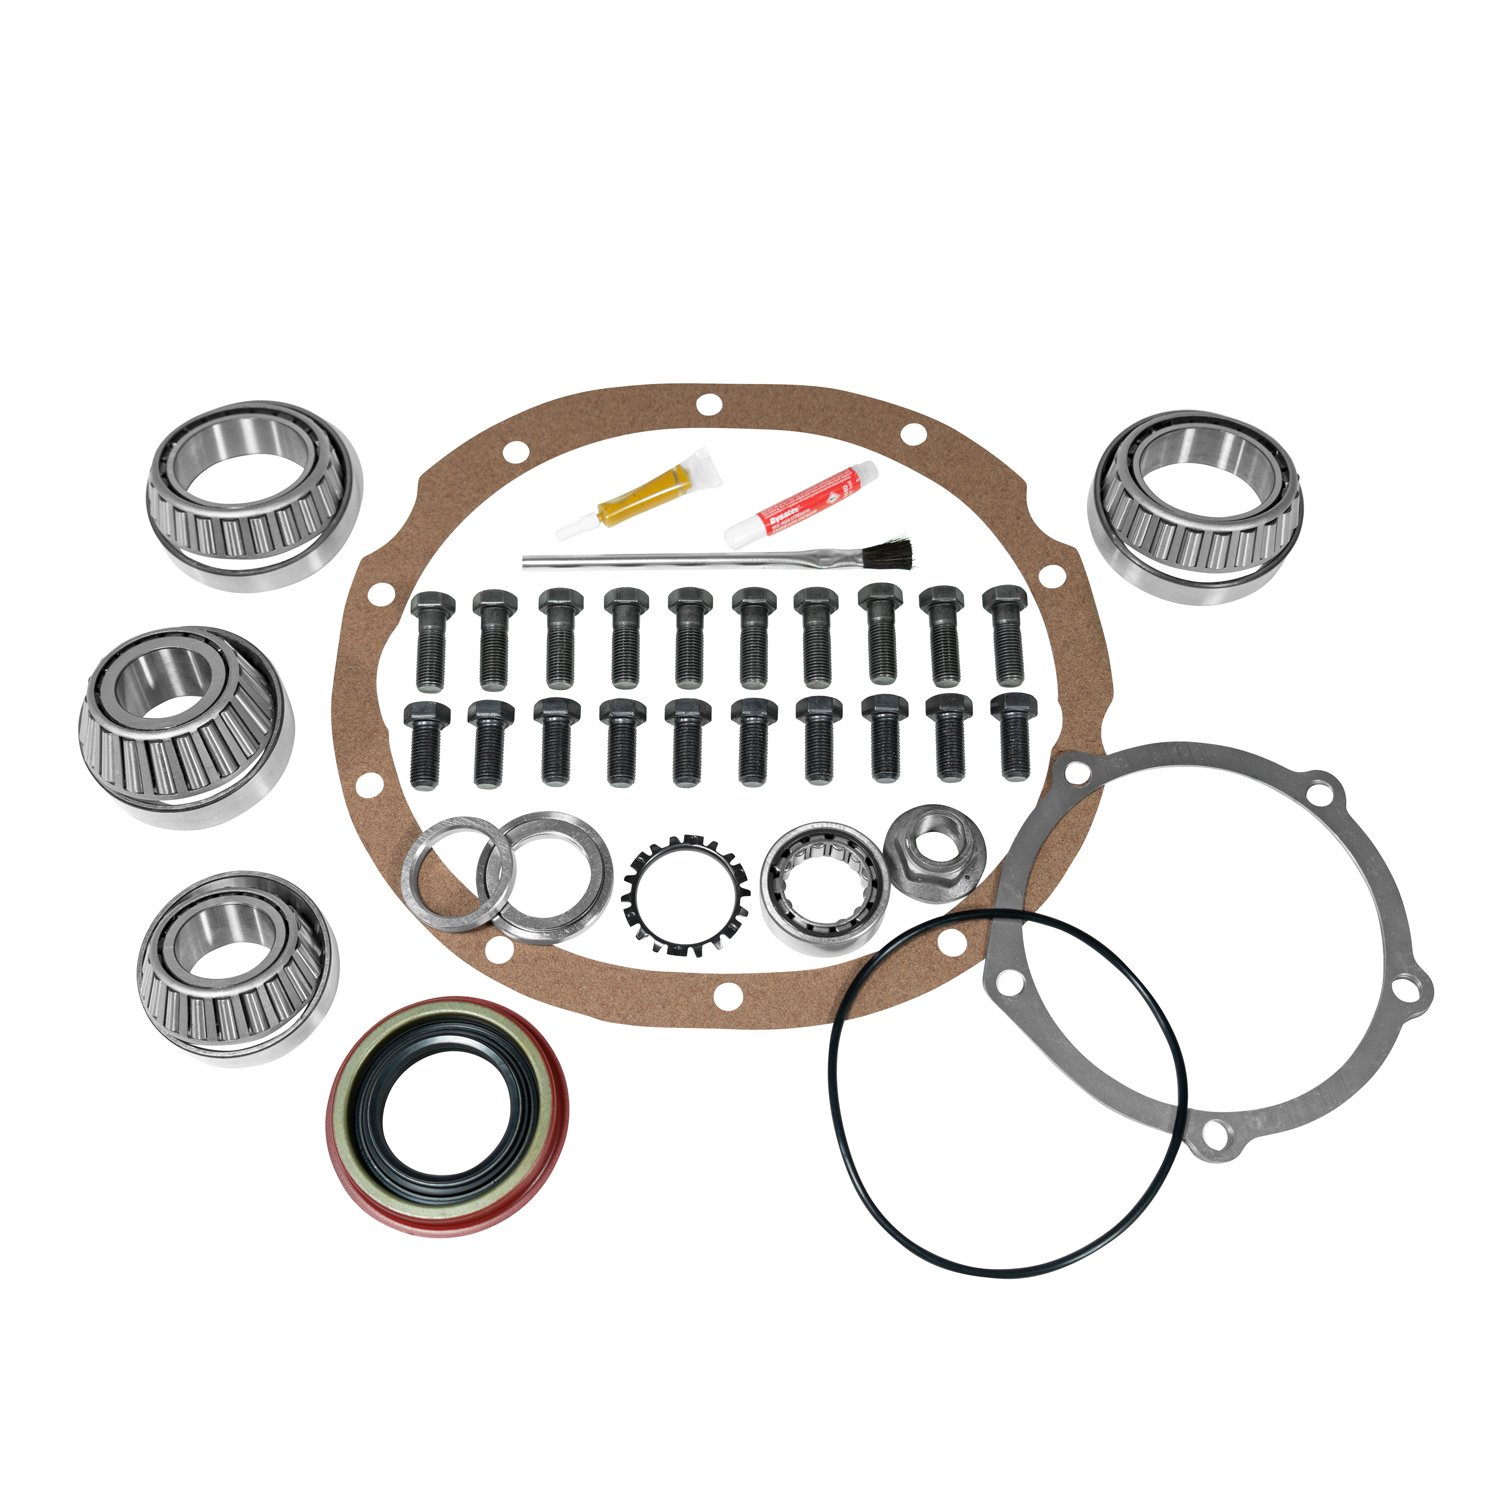 Master Overhaul Kit For Ford Daytona 9 in. Lm104911 Differential